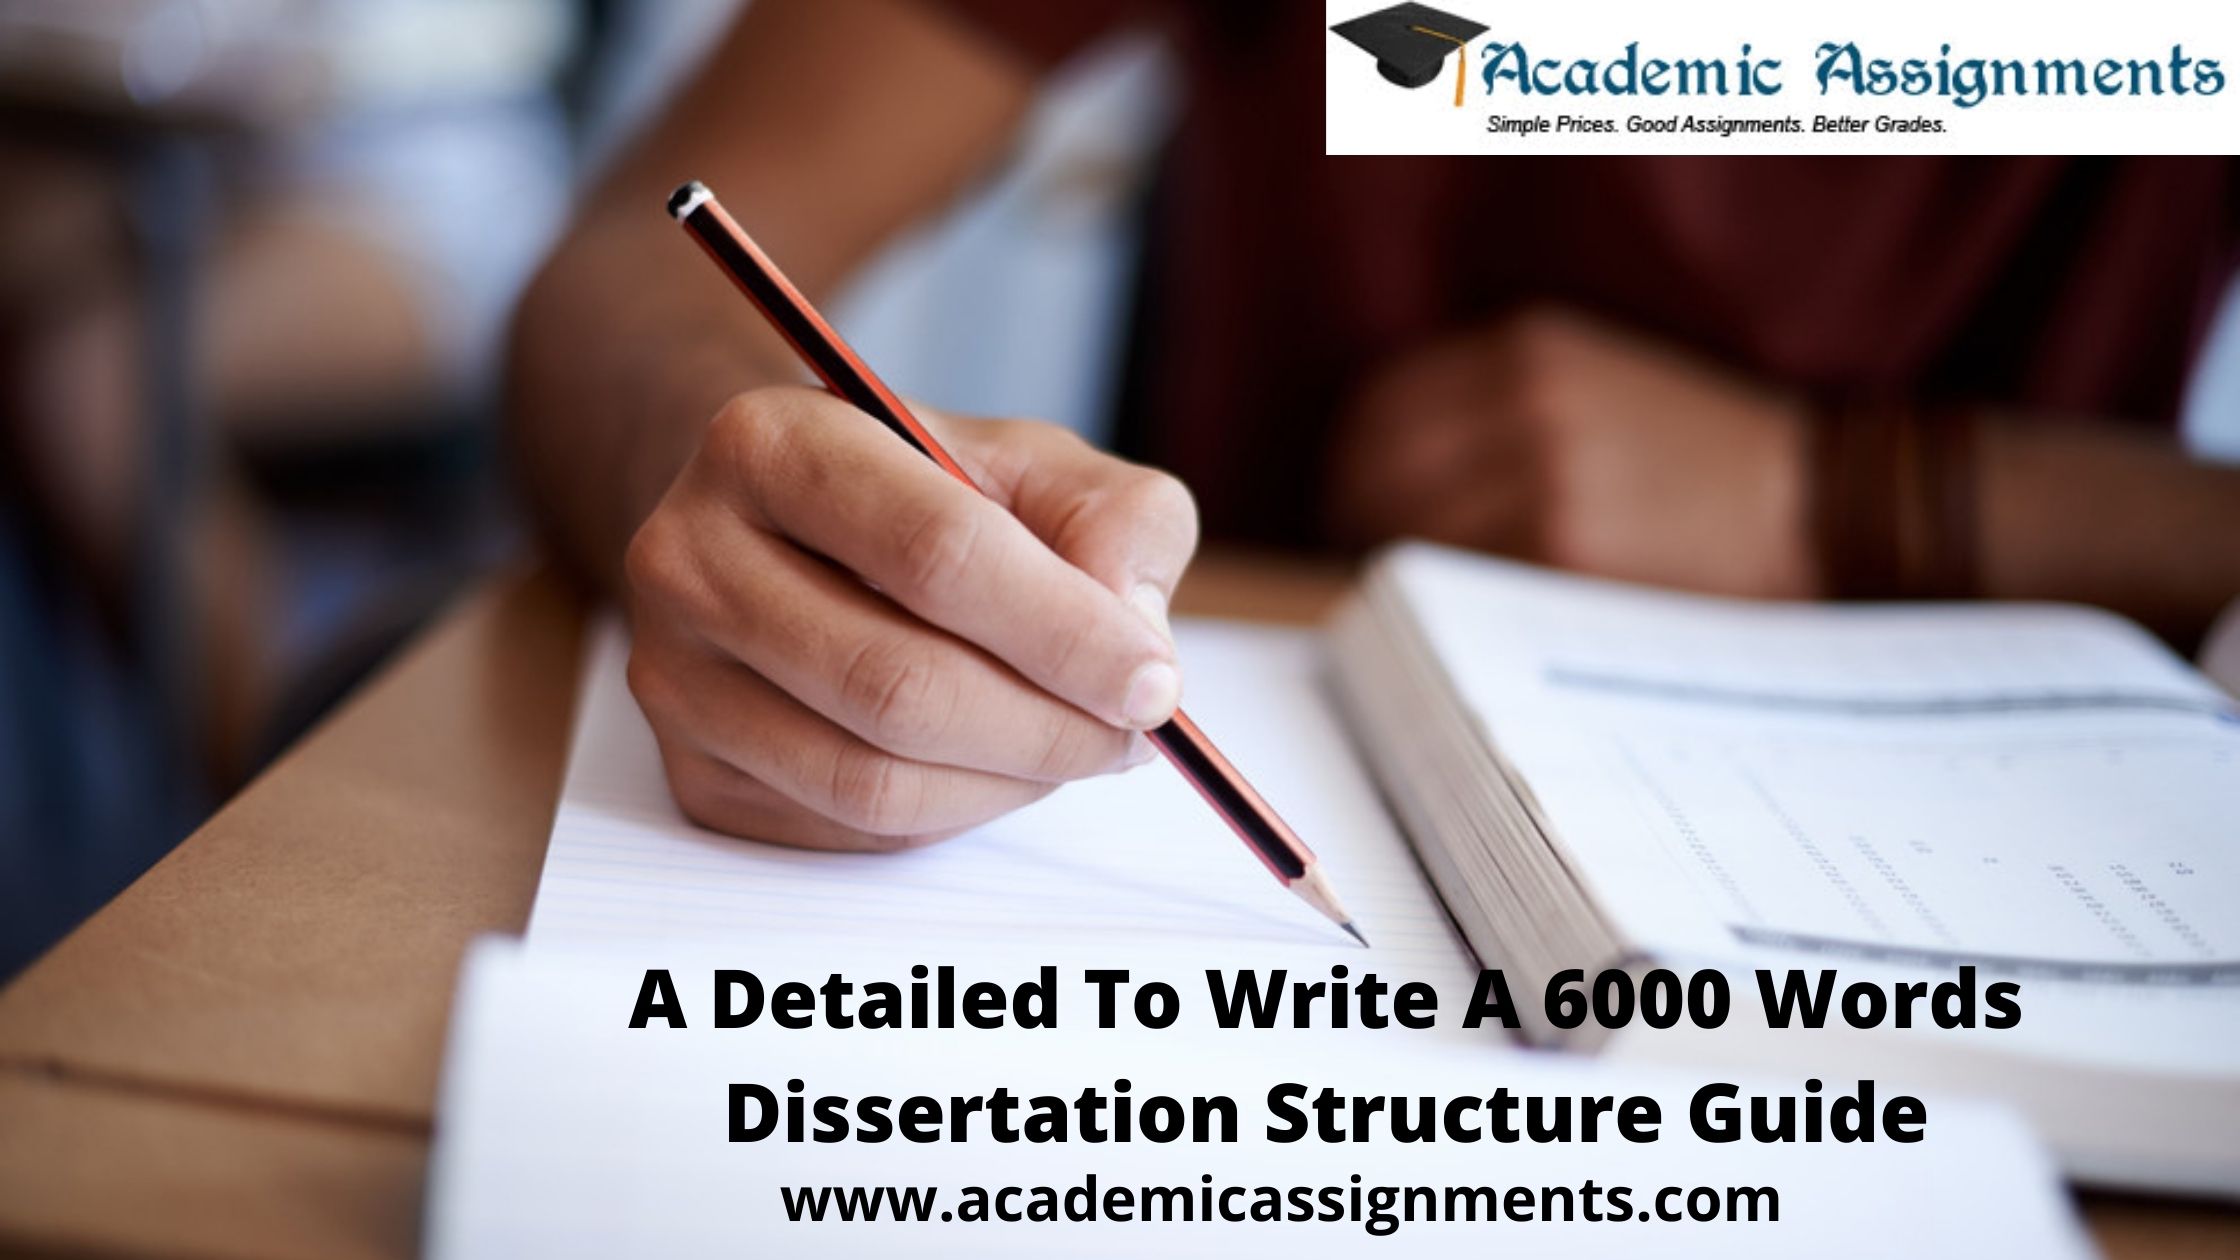 A Detailed To Write A 6000 Words Dissertation Structure